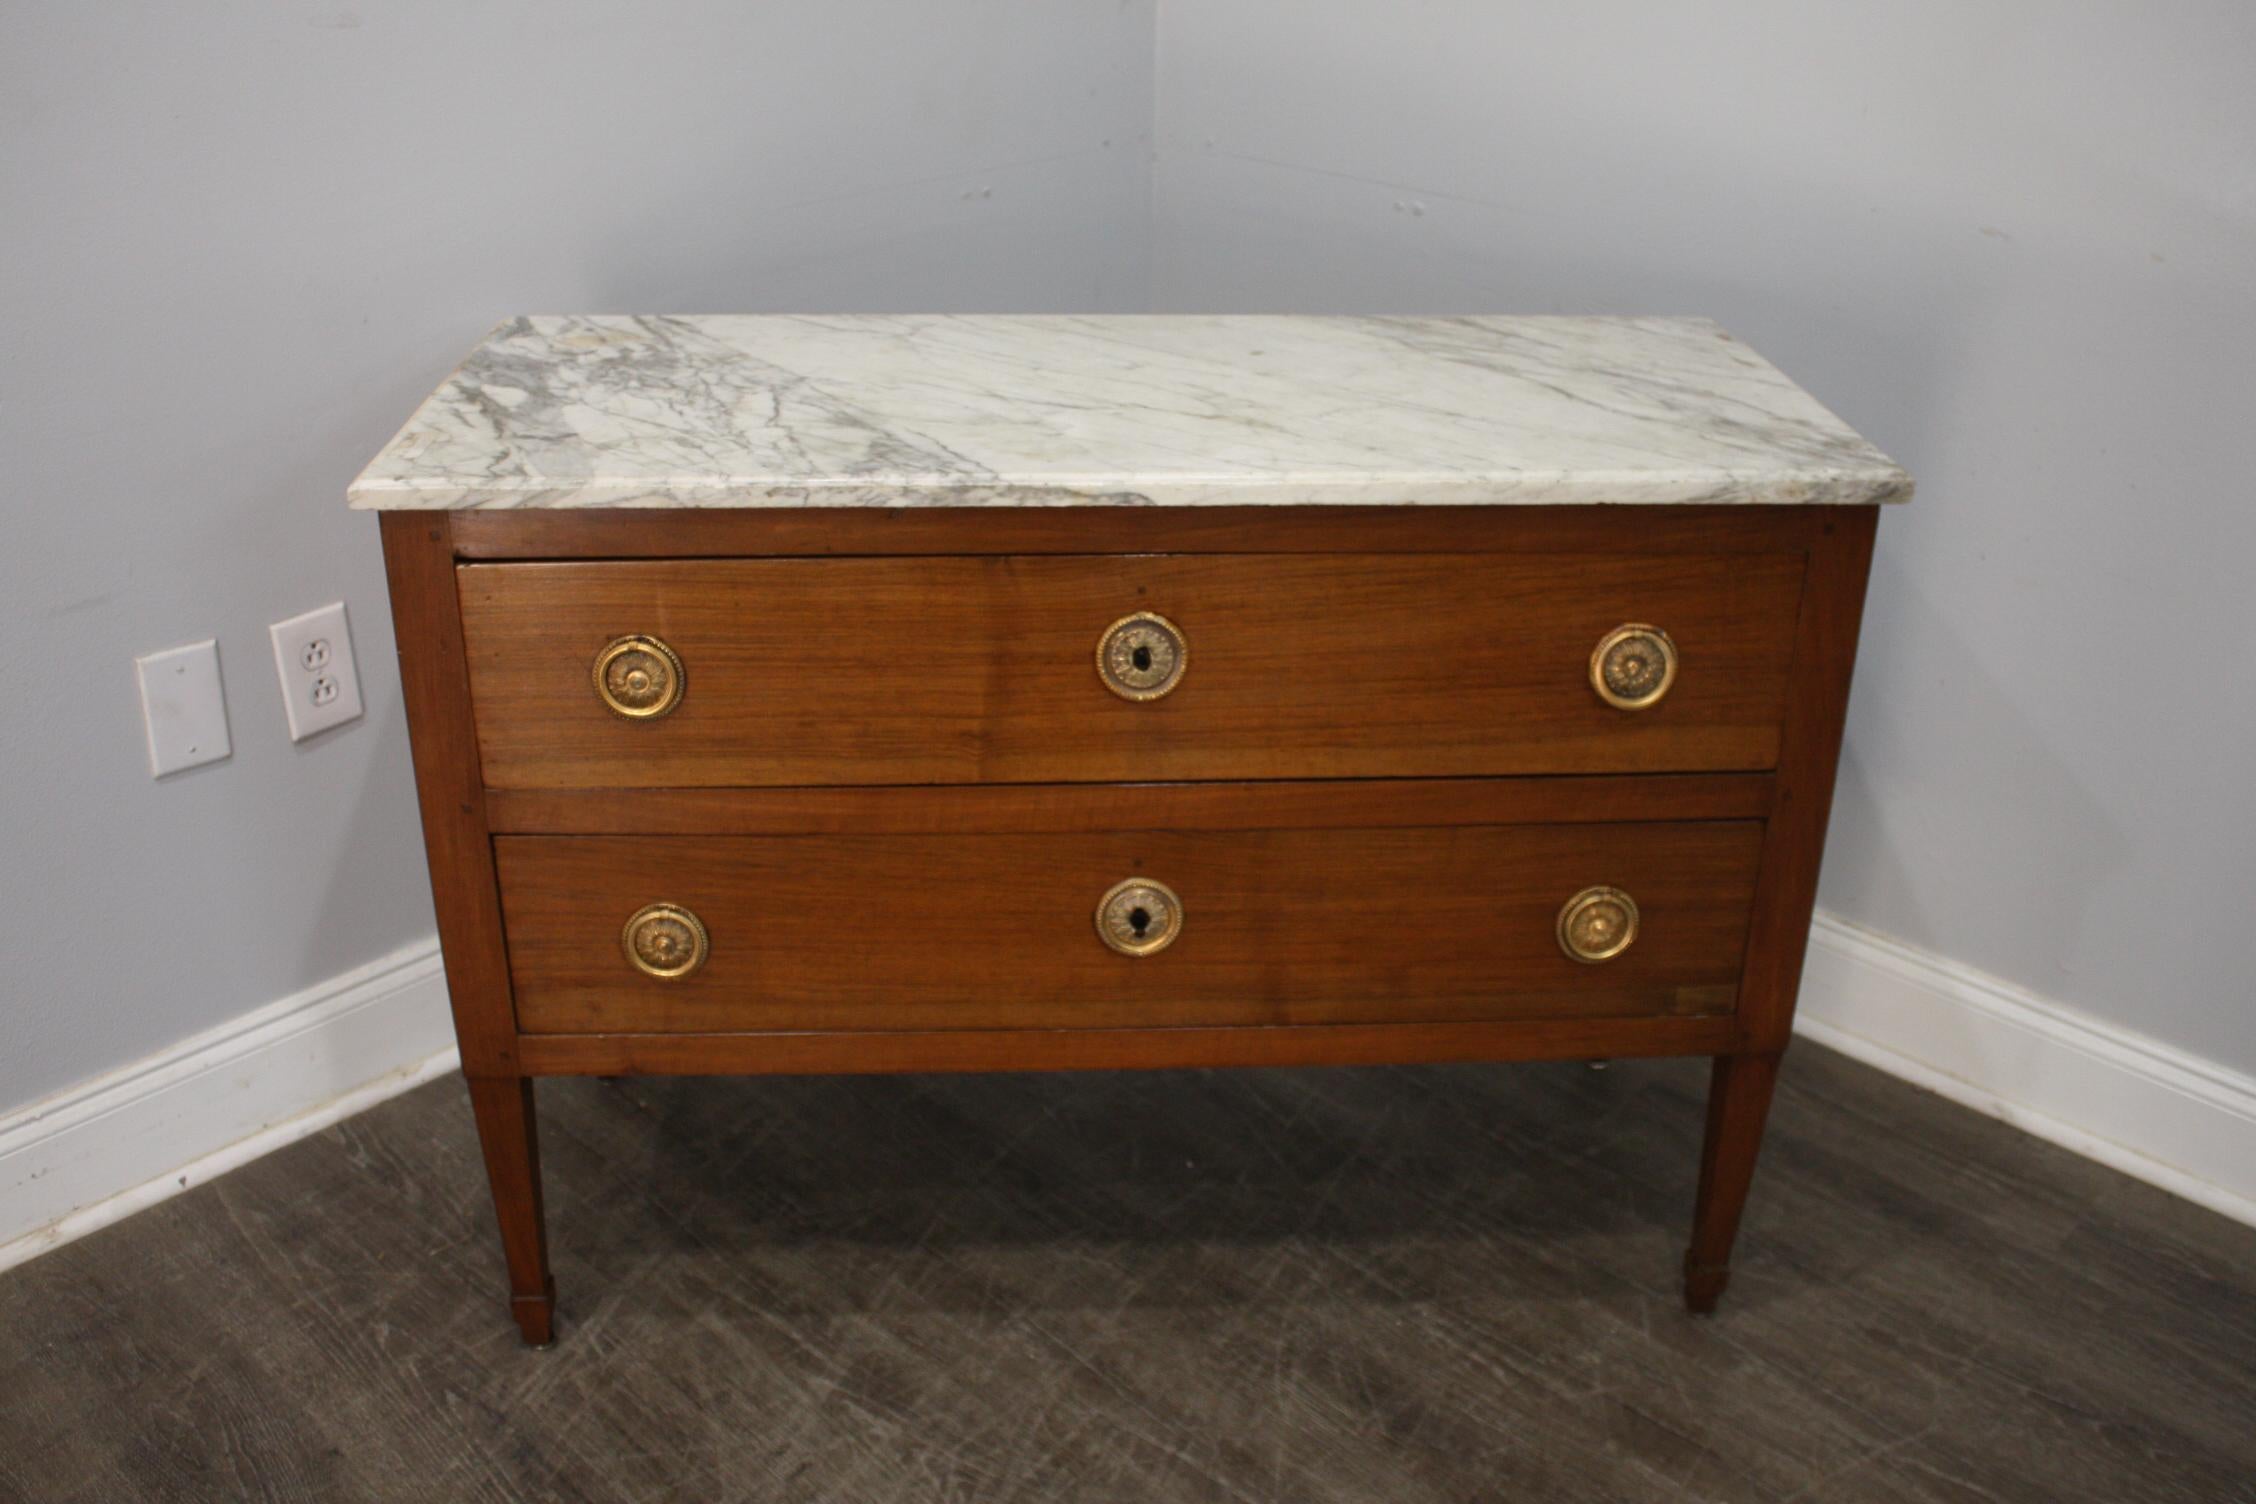 This Commode Sauteuse is made of blond mahogany with a wonderful original marble top.